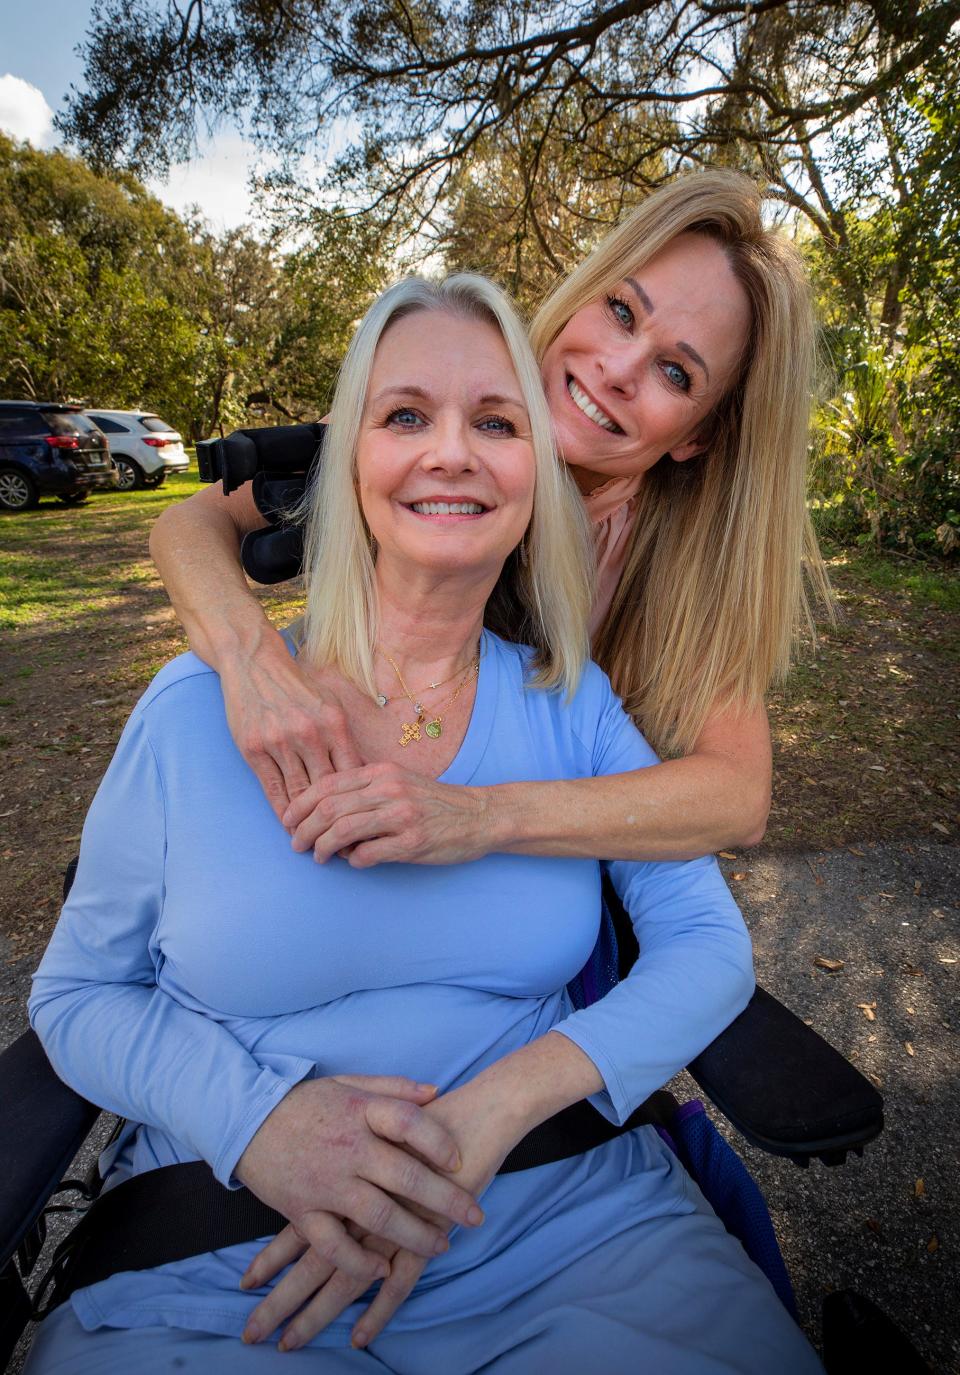 Longtime friend Laura Carpenter visits Laura Pinner at her home in South Lakeland. Pinner, 53, was diagnosed two years ago with ALS. Despite the loss of most physical abilities, she tries to remain positive and welcomes frequent visits from friends.